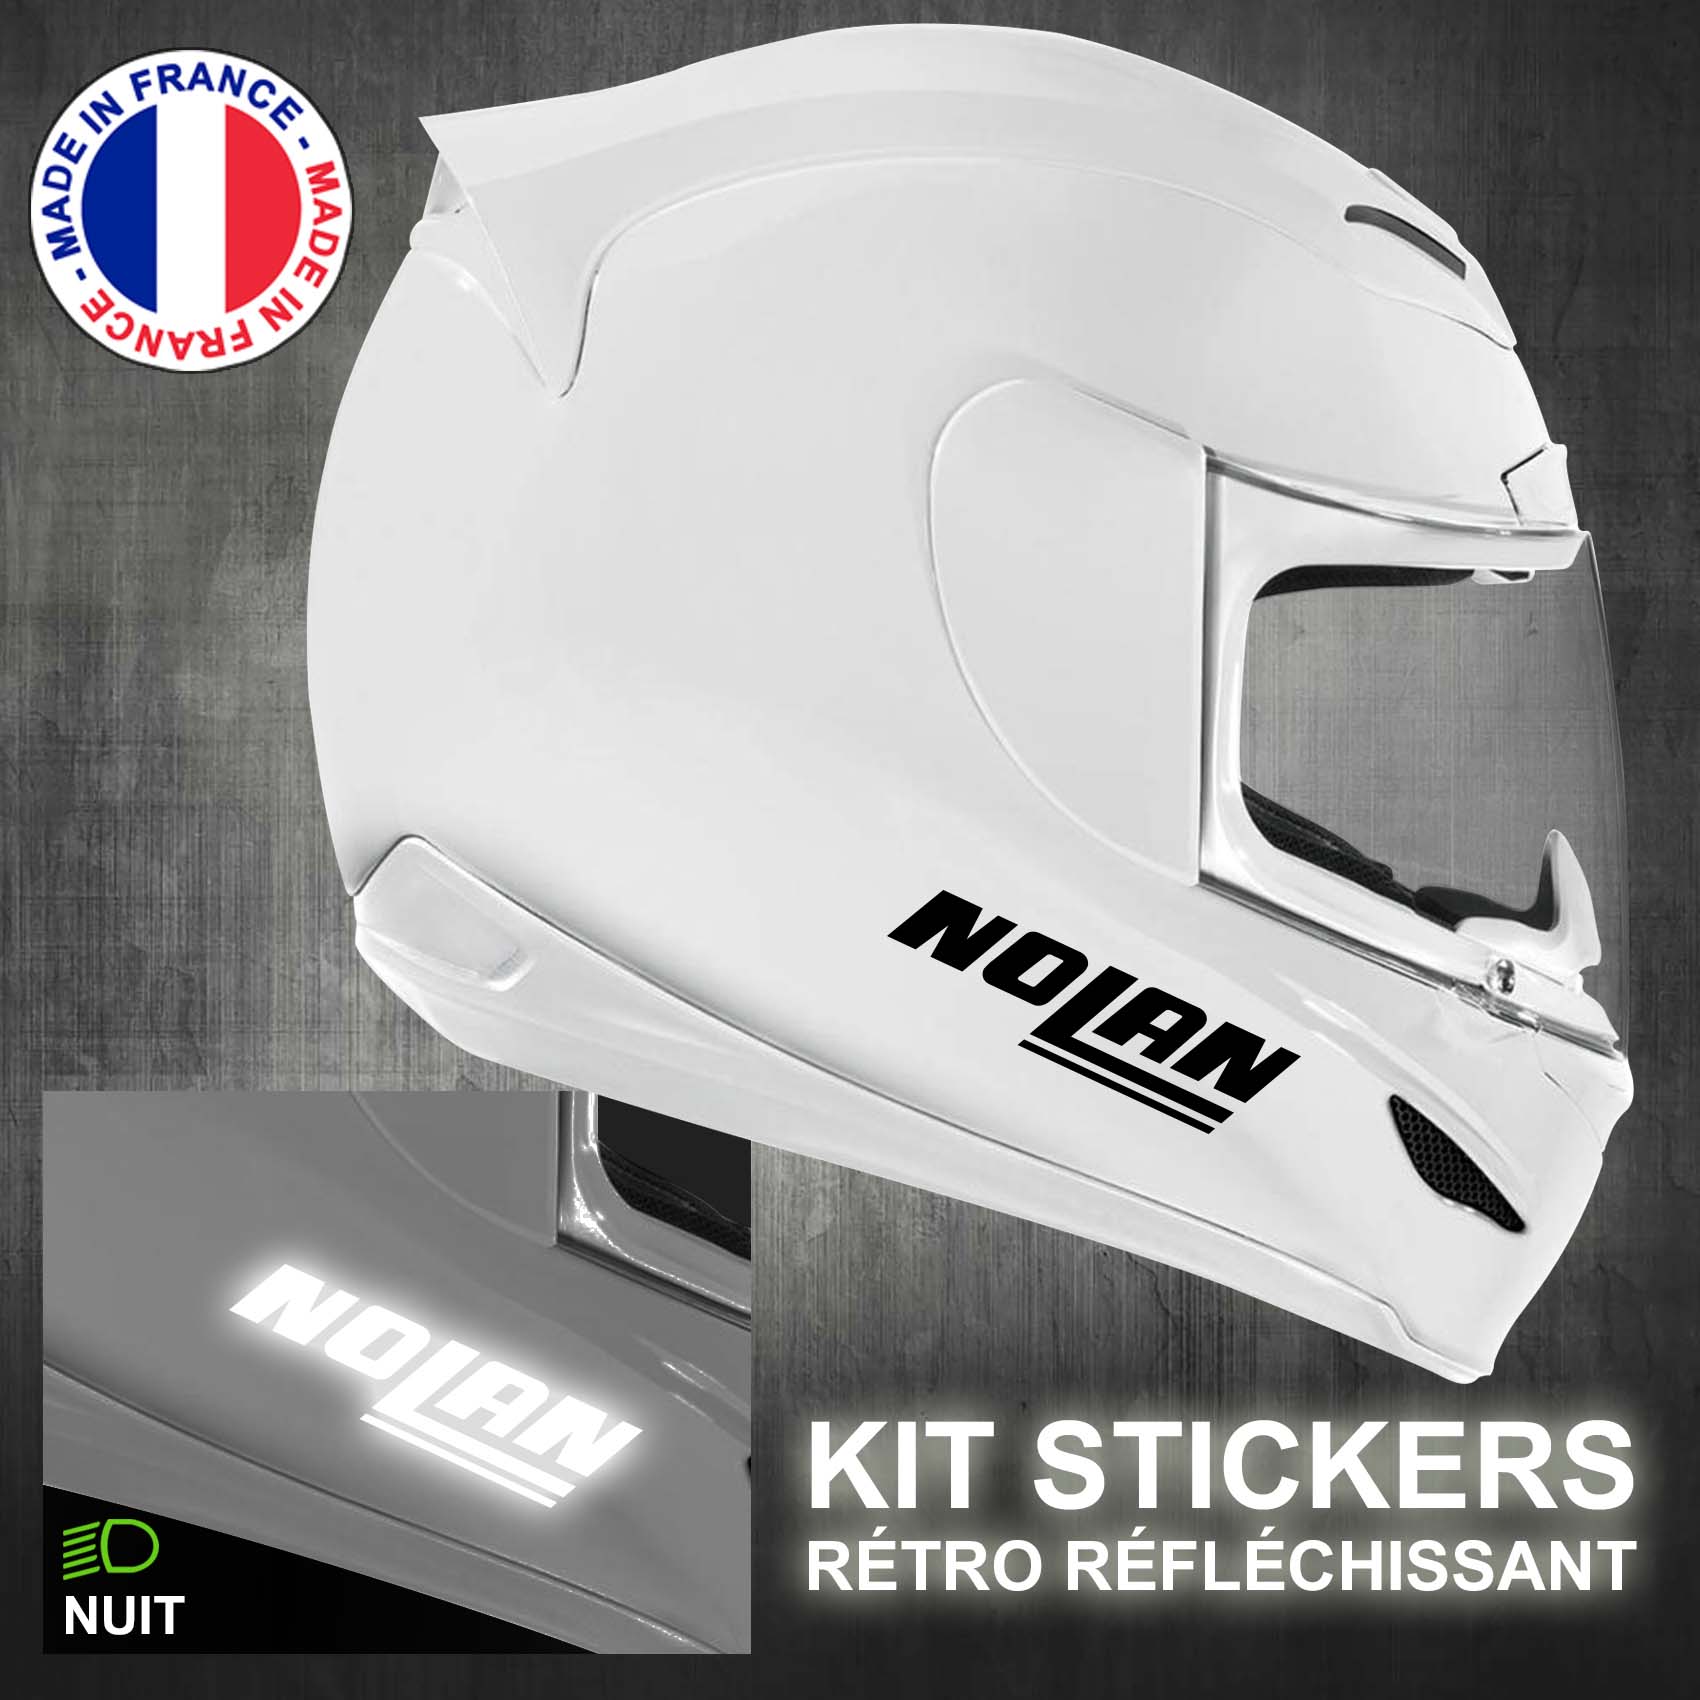 stickers-casque-moto-nolan-ref1-retro-reflechissant-autocollant-blanc-moto-velo-tuning-racing-route-sticker-casques-adhesif-scooter-nuit-securite-decals-personnalise-personnalisable-min